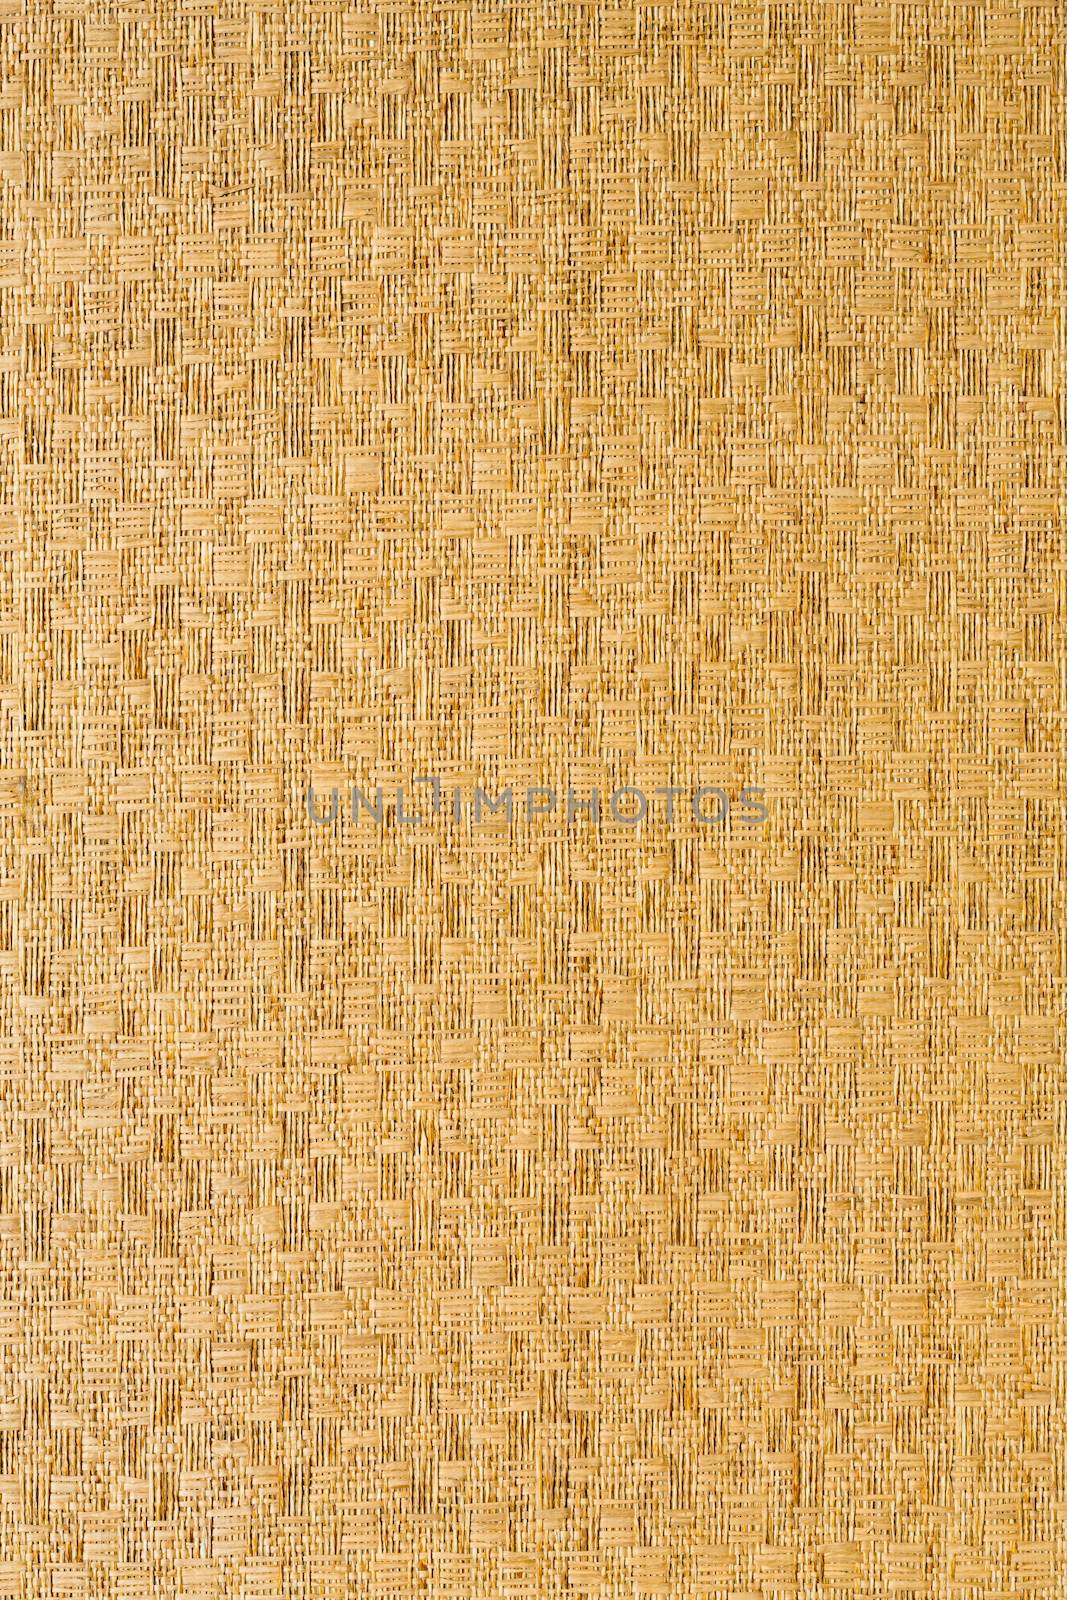 Straw mat for wall decoration